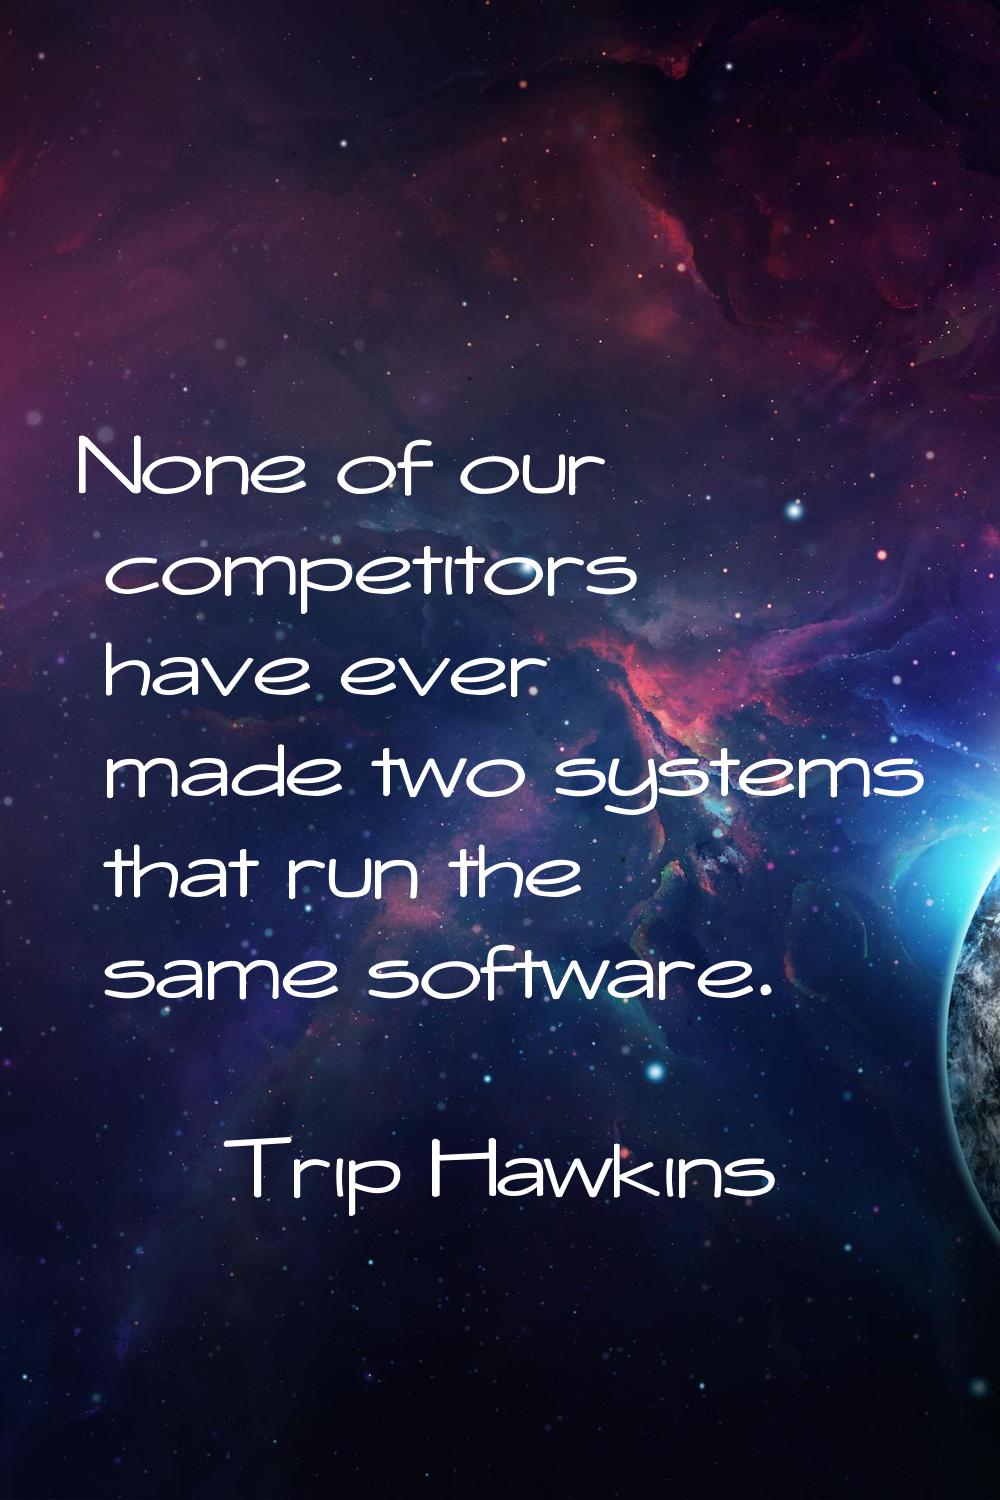 None of our competitors have ever made two systems that run the same software.